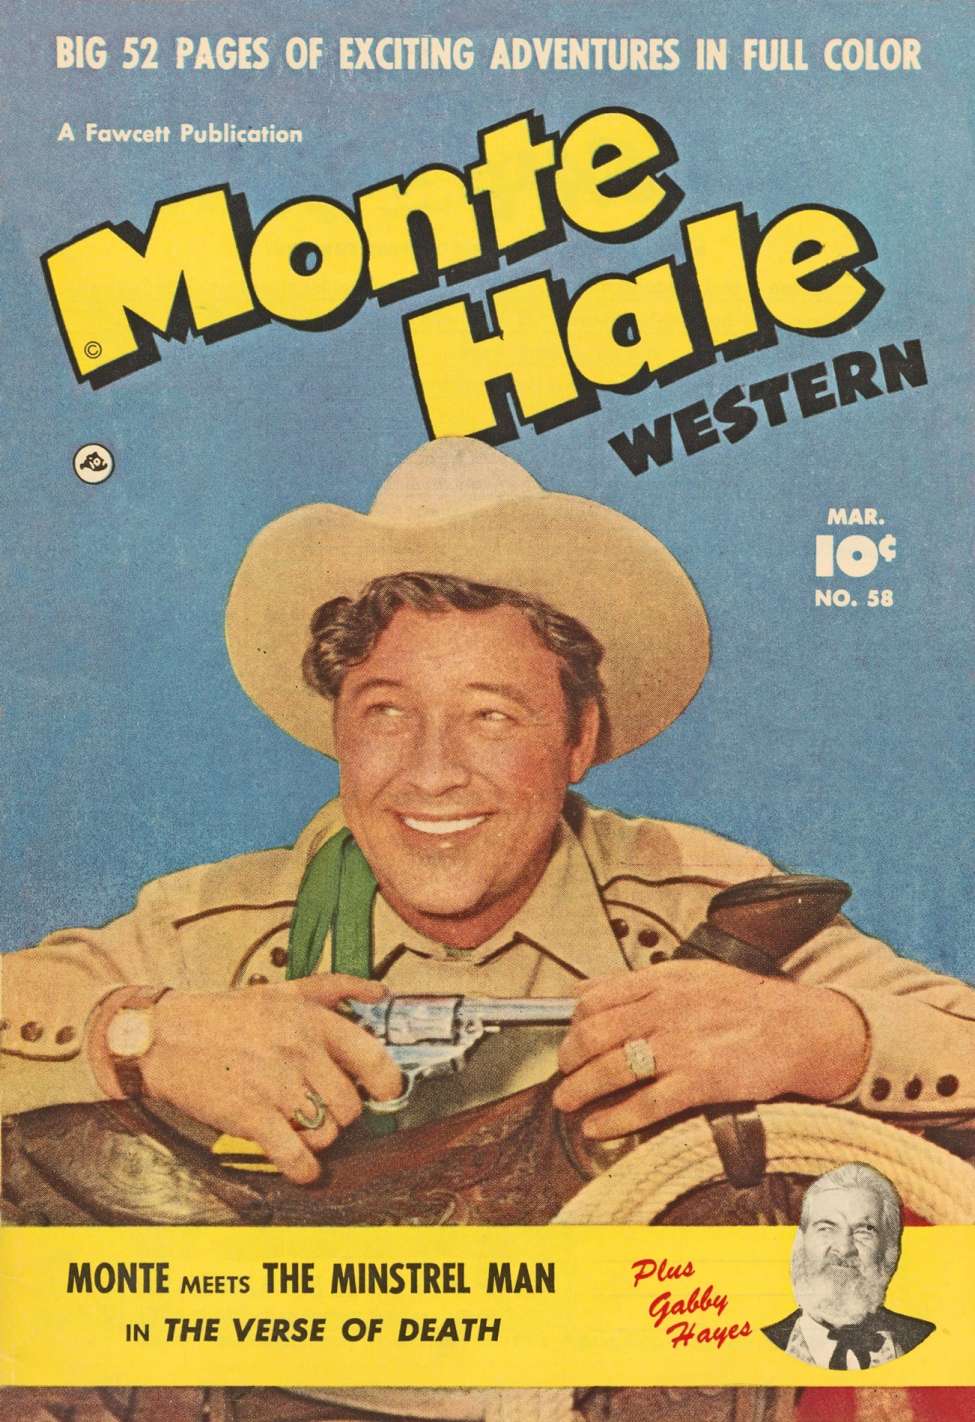 Book Cover For Monte Hale Western 58 - Version 2